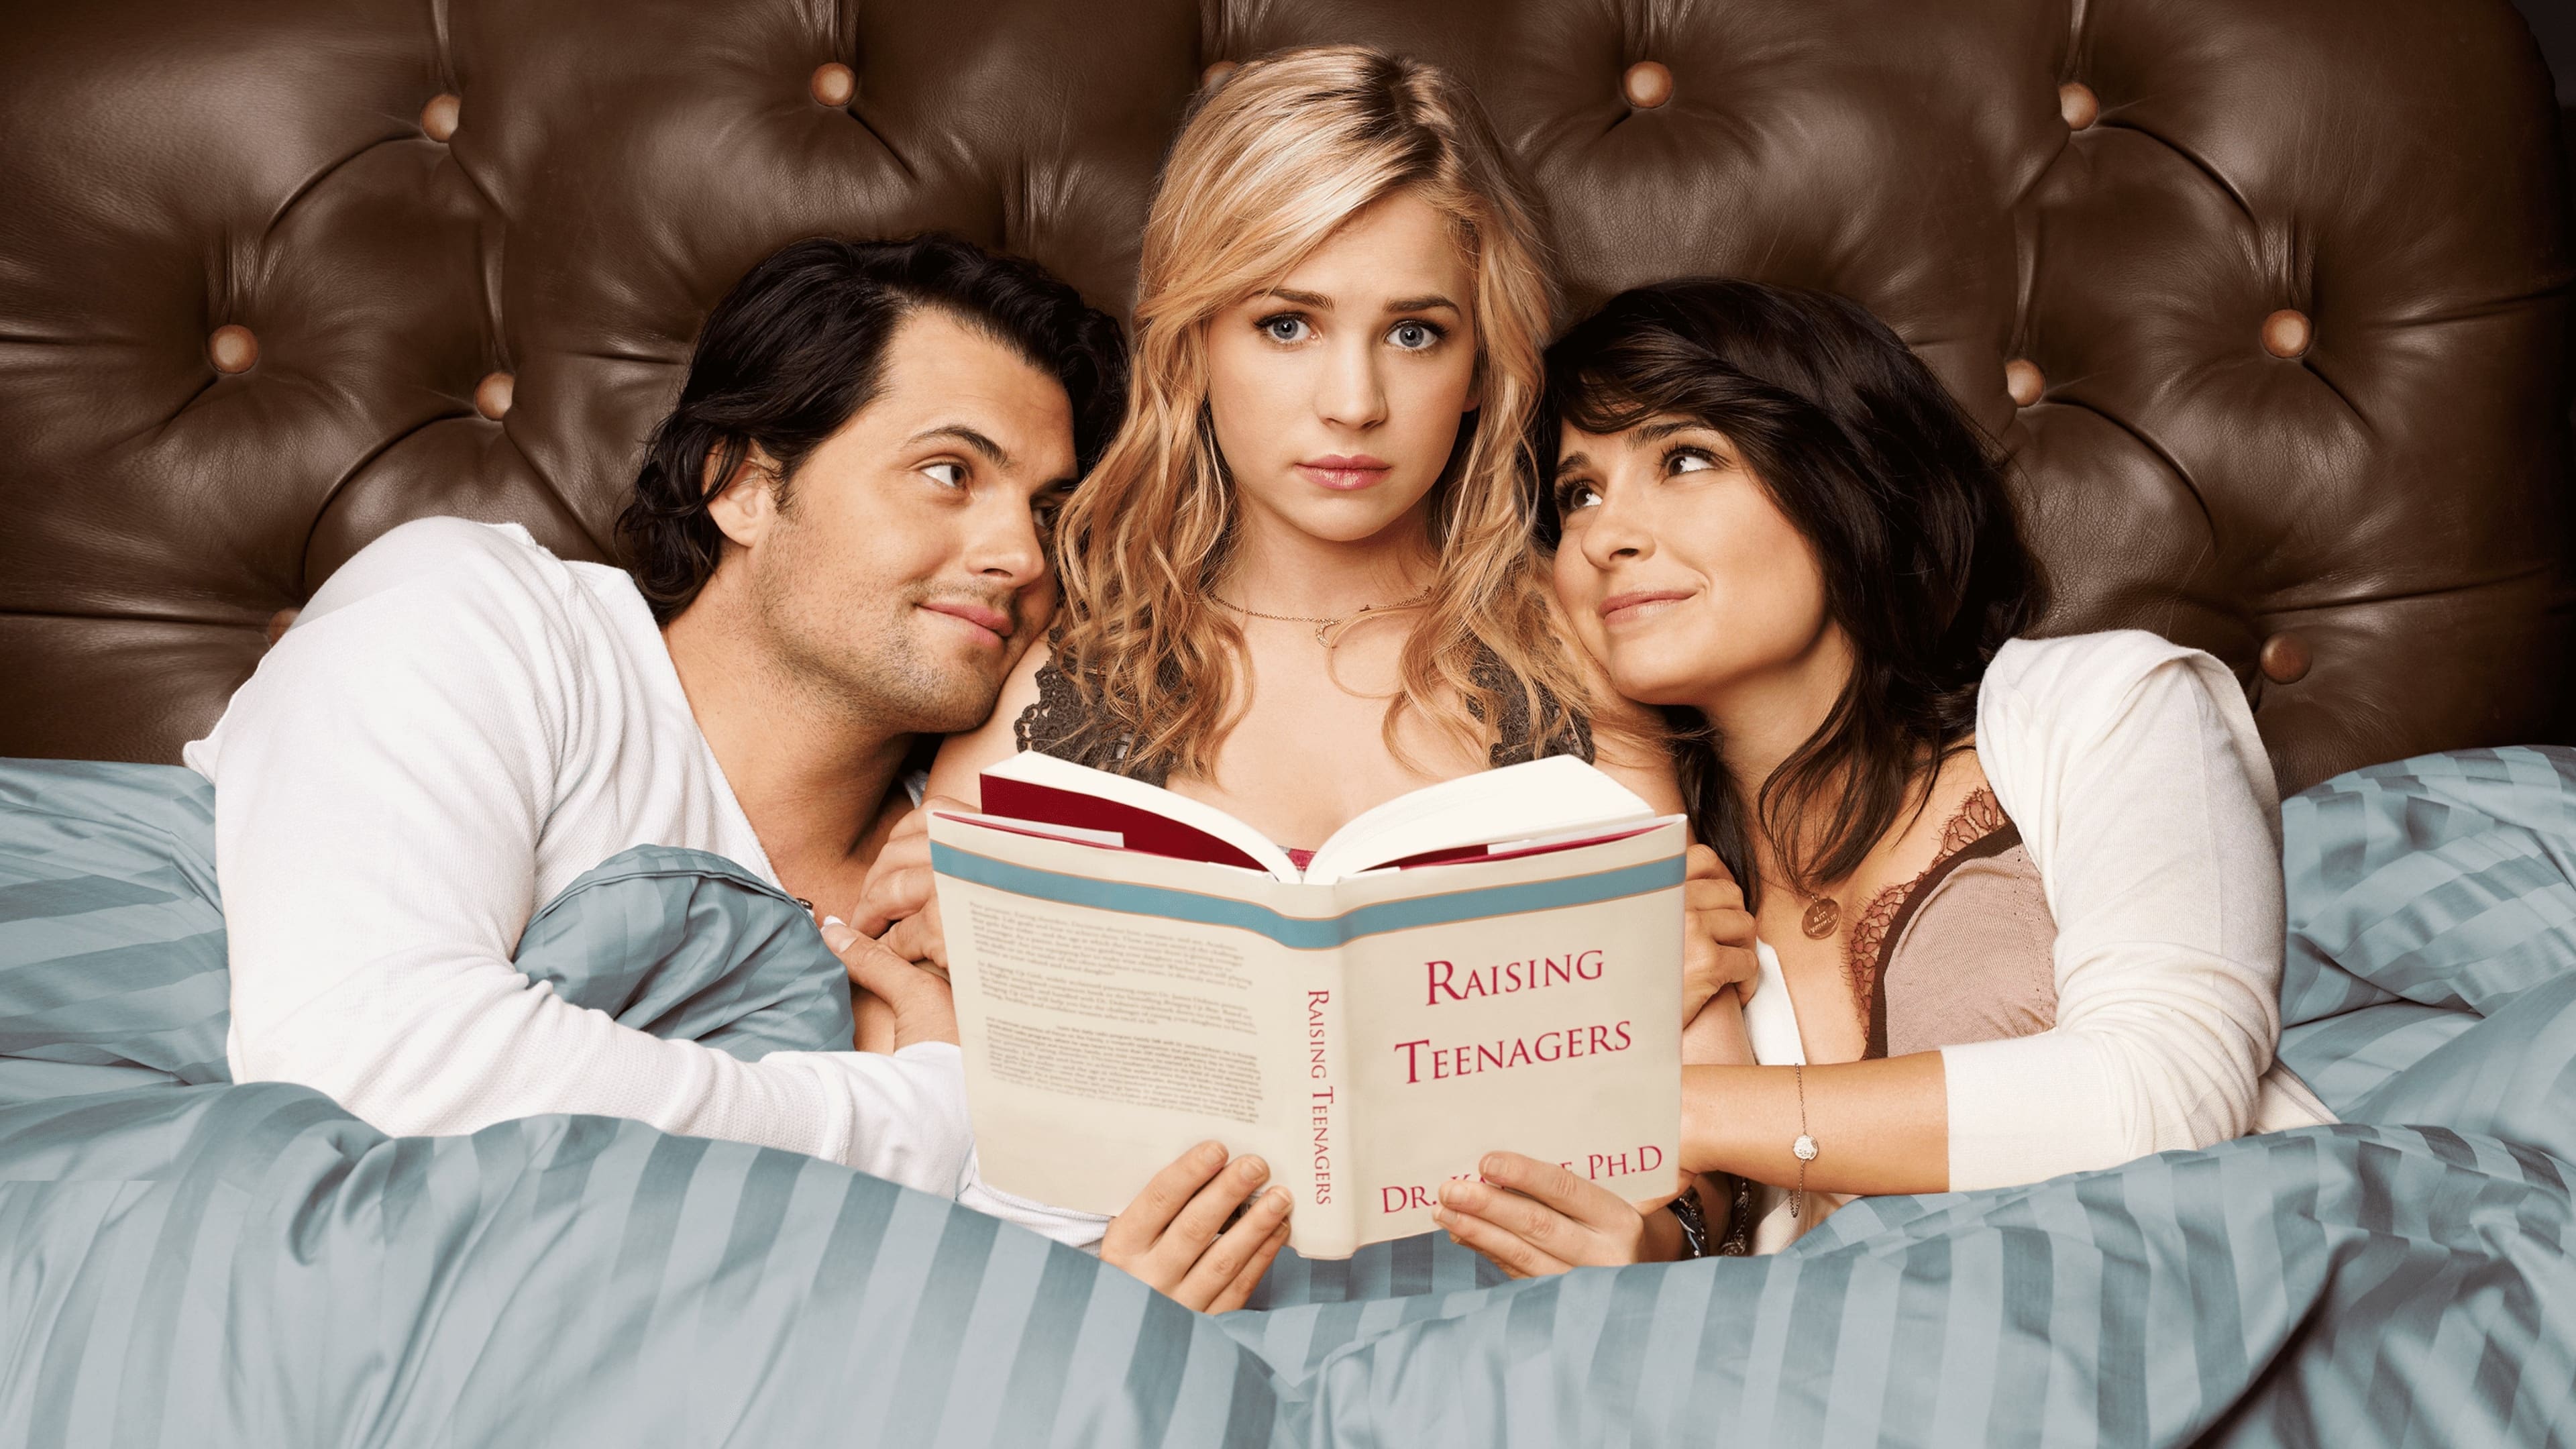 Watch Life UneXpected Online